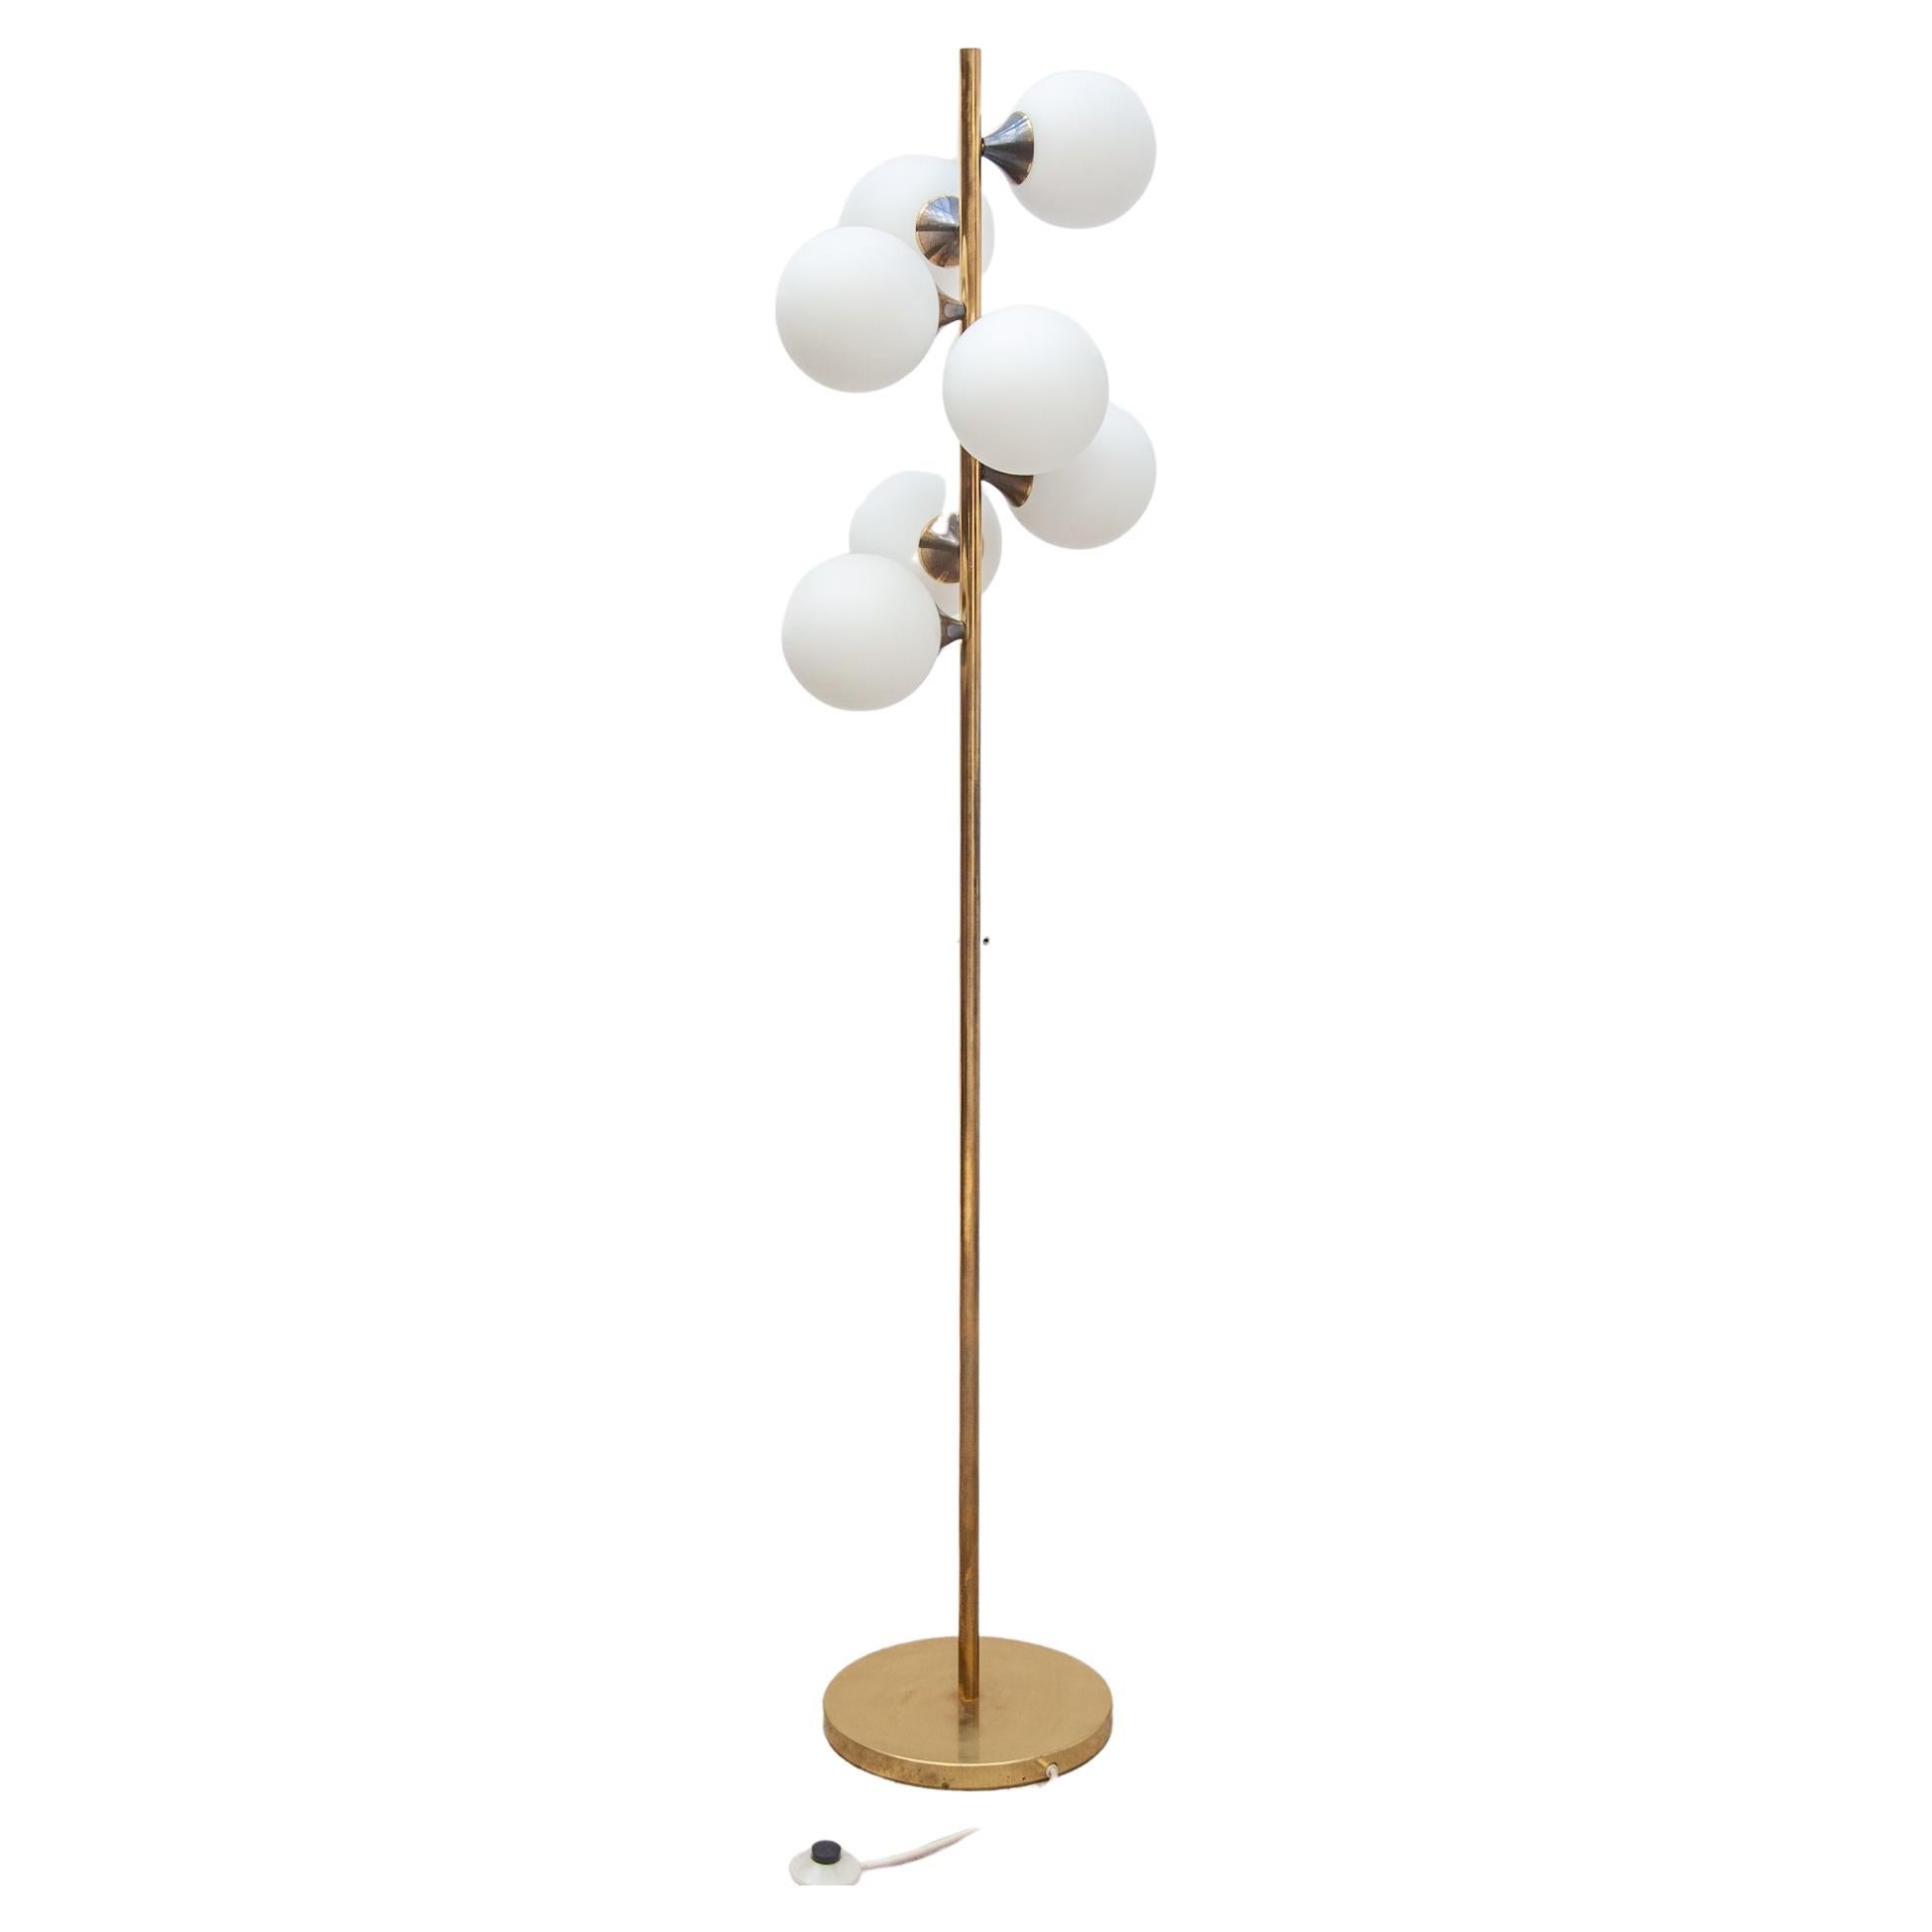 Kaiser floor Lamp 7 lights opaline glass globes and brass base, 1950, Germany. Beautiful mid century floor lamp. Very elegant and sleek design. Qualitative lamp made in the 1950s. In good vintage condition.Height: 165cm/7 lamps fitting e14.